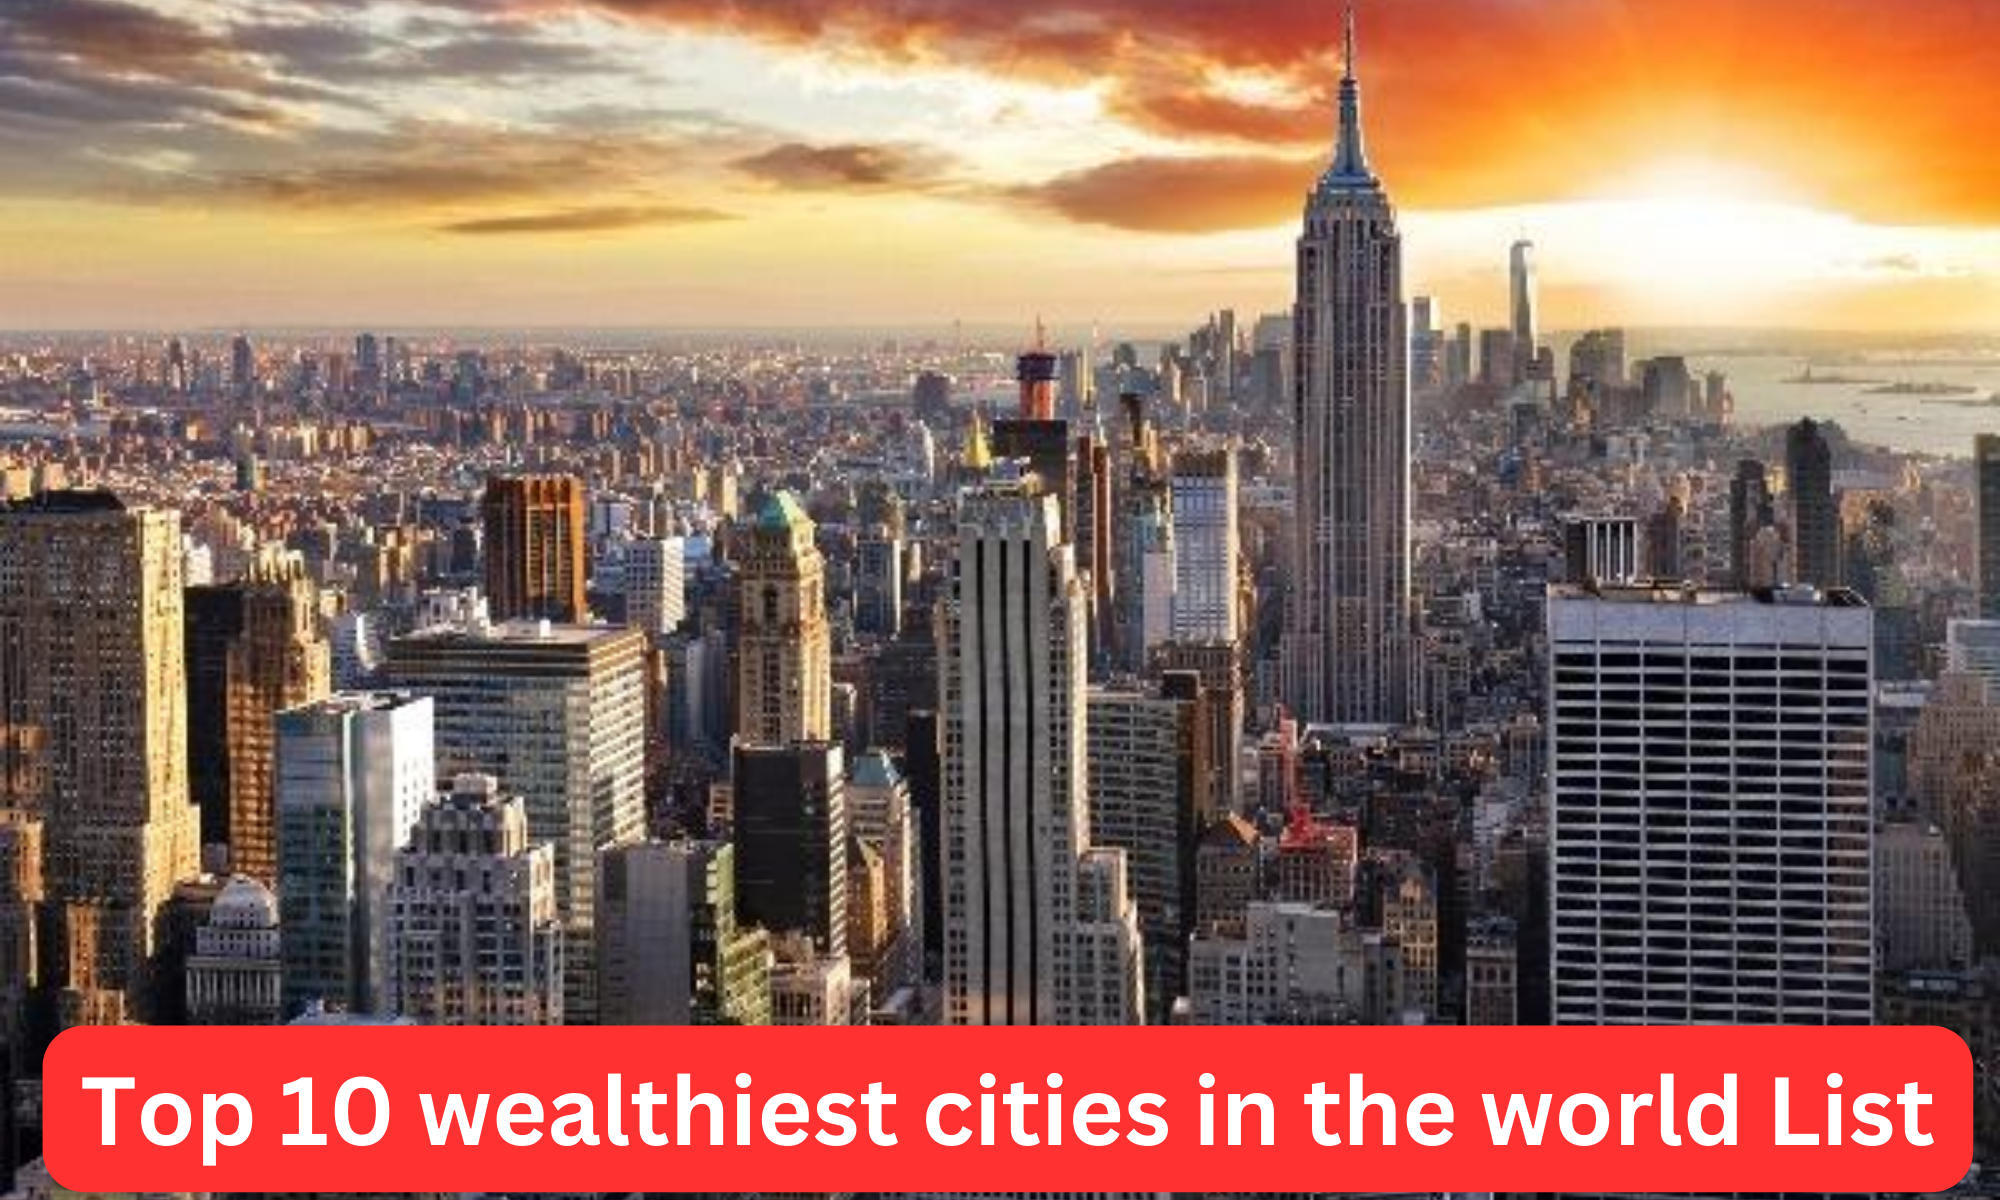 Top 10 wealthiest cities in the world Complete List_30.1